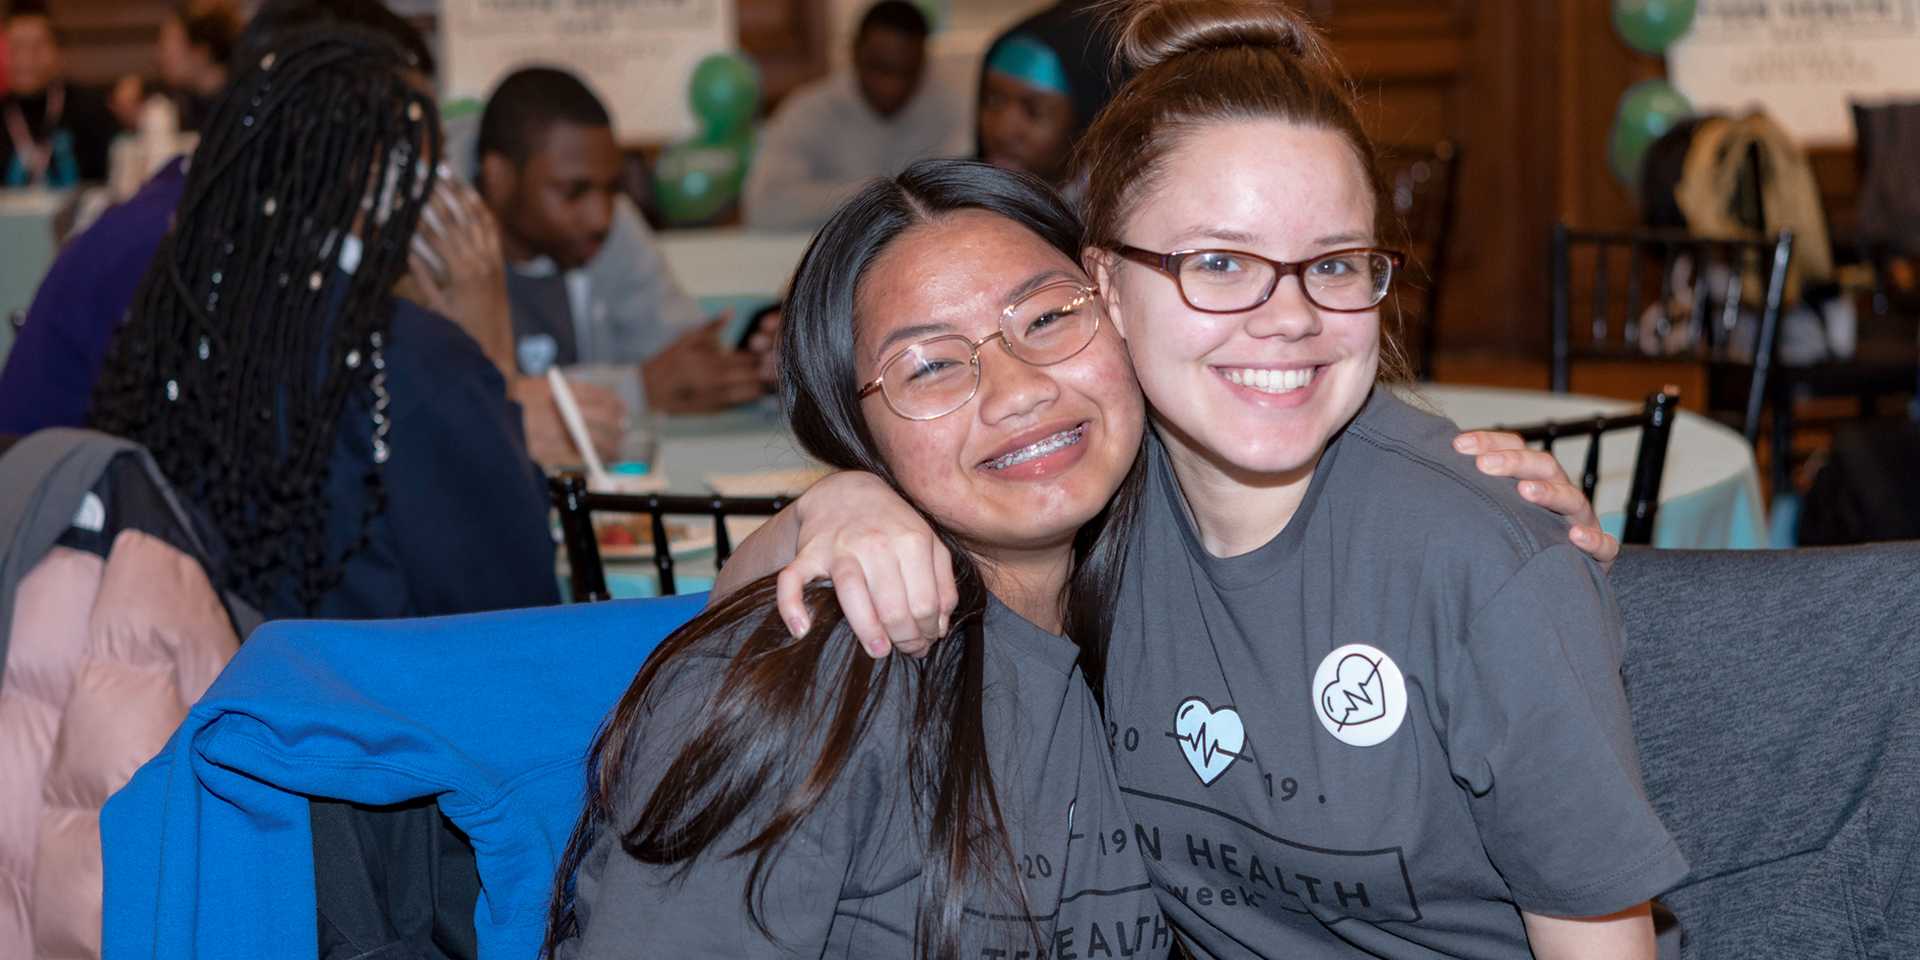 Two teen girls in gray shirts hugging and smiling